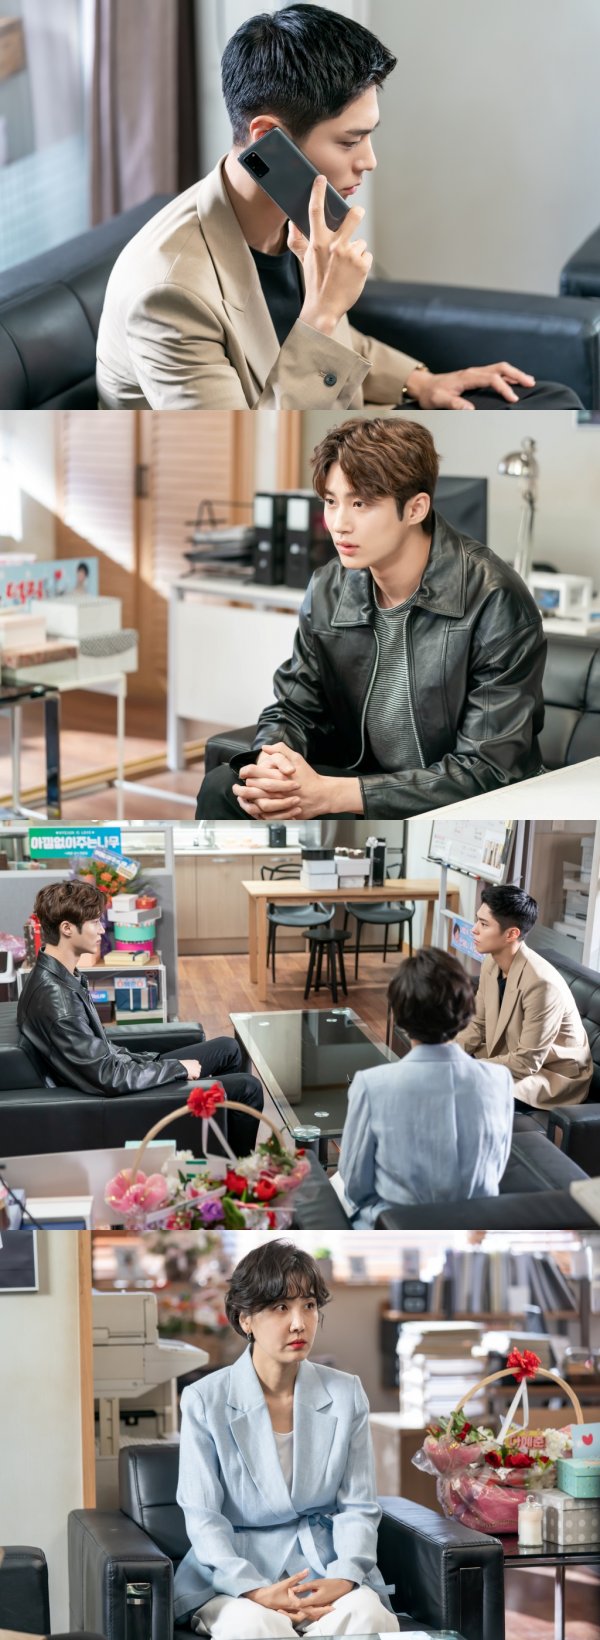 TVNs monthly drama Record of Youth released the images of Sangers Sa Hye-joon and Byeon Wooseok on the 12th.The day I have never seen before, I am curious about the nerves.In the last broadcast, Sa Hye-joon won the best performance award by succeeding in the drama The Return of the King.Sa Hye-joons unstoppable Shus move, which has achieved Actors dream over the cold reality, gave a thrilling Qatarsis. However, unexpected trials came.The news of Charlie Chung (Lee Seung-jun)s death, which was taken by Sa Hye-joon at the moment of enjoying happiness, amplified his curiosity about future development.In the meantime, the tension of Champon Entertainment is caught, further heightening the sense of Danger.The hard face of Sa Hye-joon, who is talking to someone, makes him guess the unusual incident that came to him.With the silence flowing, the eye-catching of Sa Hye-joon and Won Hae-hyo Day pulls the tension tight. Manager Lee Min-jae (Shin Dong-mi) is also confused.Sa Hye-joon and Won Hae-hyo, who supported each other more than anyone else while growing the same dream, are drawing attention to what changes will come to the two youths who face the crossroads of different Choices.In the 11th episode, which is broadcast today (12th), Sa Hye-joons overcoming period, which faces an unexpected ordeal, is drawn.Charlie Justice A helper who is not welcomed by Sa Hye-joon, who is suffering from rumors that can not be controlled by death, will appear.Please pay attention to whether you can protect your dreams, love, and friendship in your own waving Danger, said the production team of the Record of Youth.Choices of Sa Hye-joon, who does not lose his conviction, will be impressed and Qatarsis. Photo Offering: TVN Record of Youth